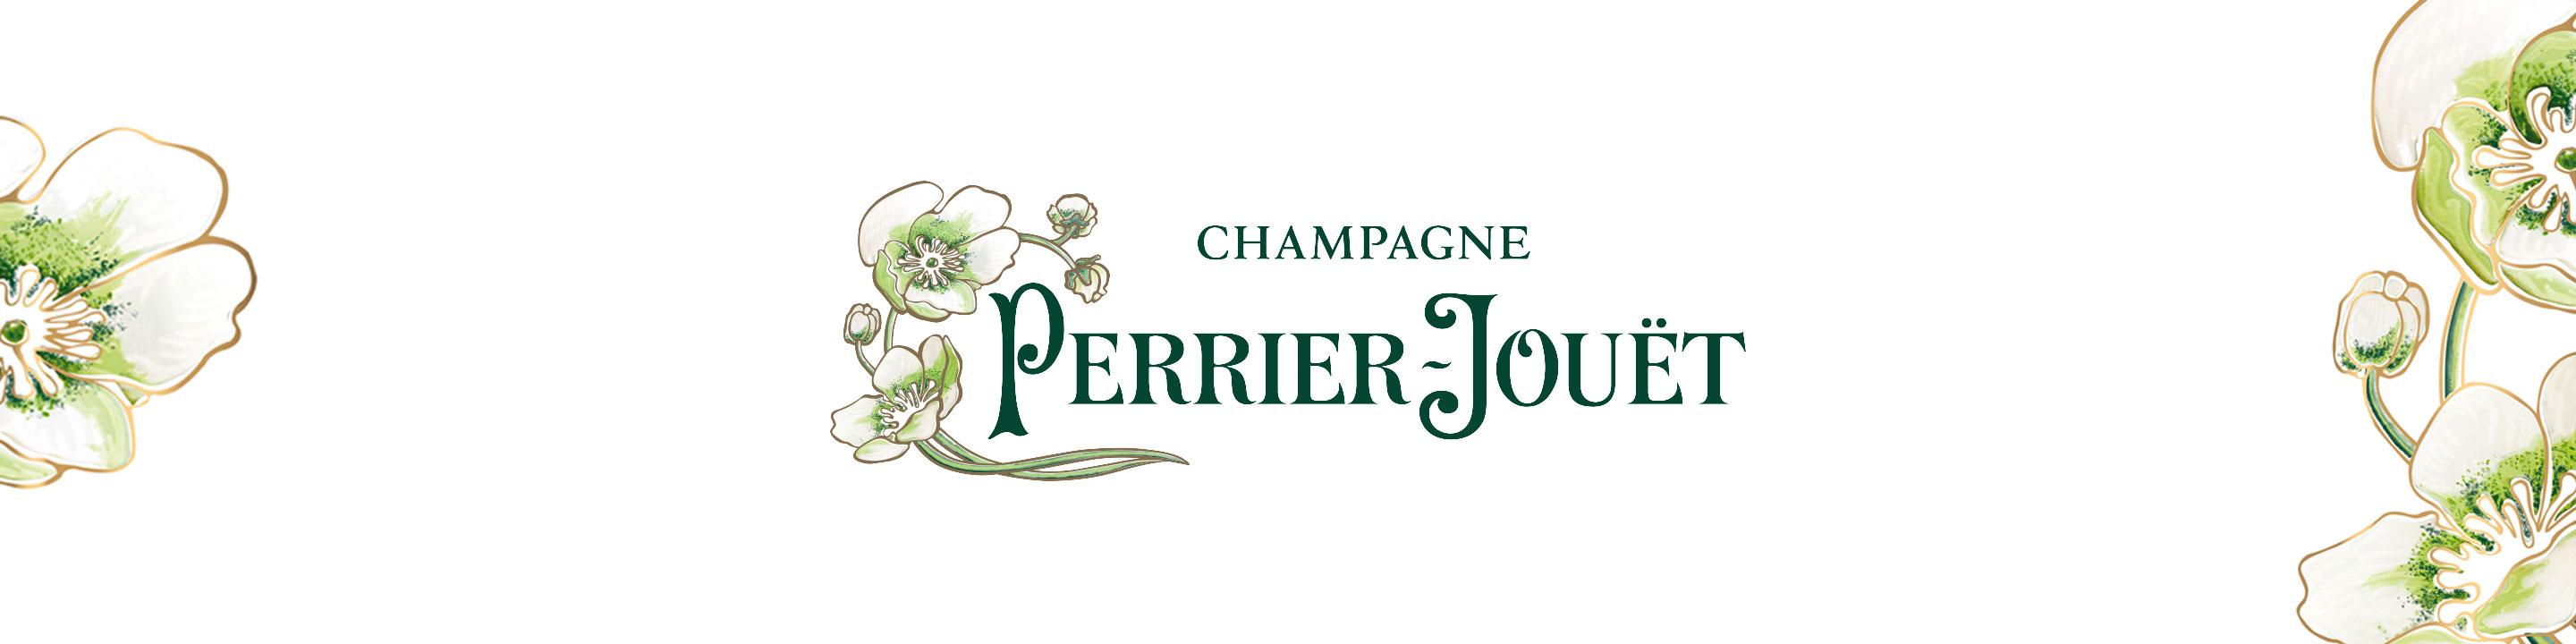 Buy Perrier-Jouet online now from your nearby liquor store via Minibar Delivery.